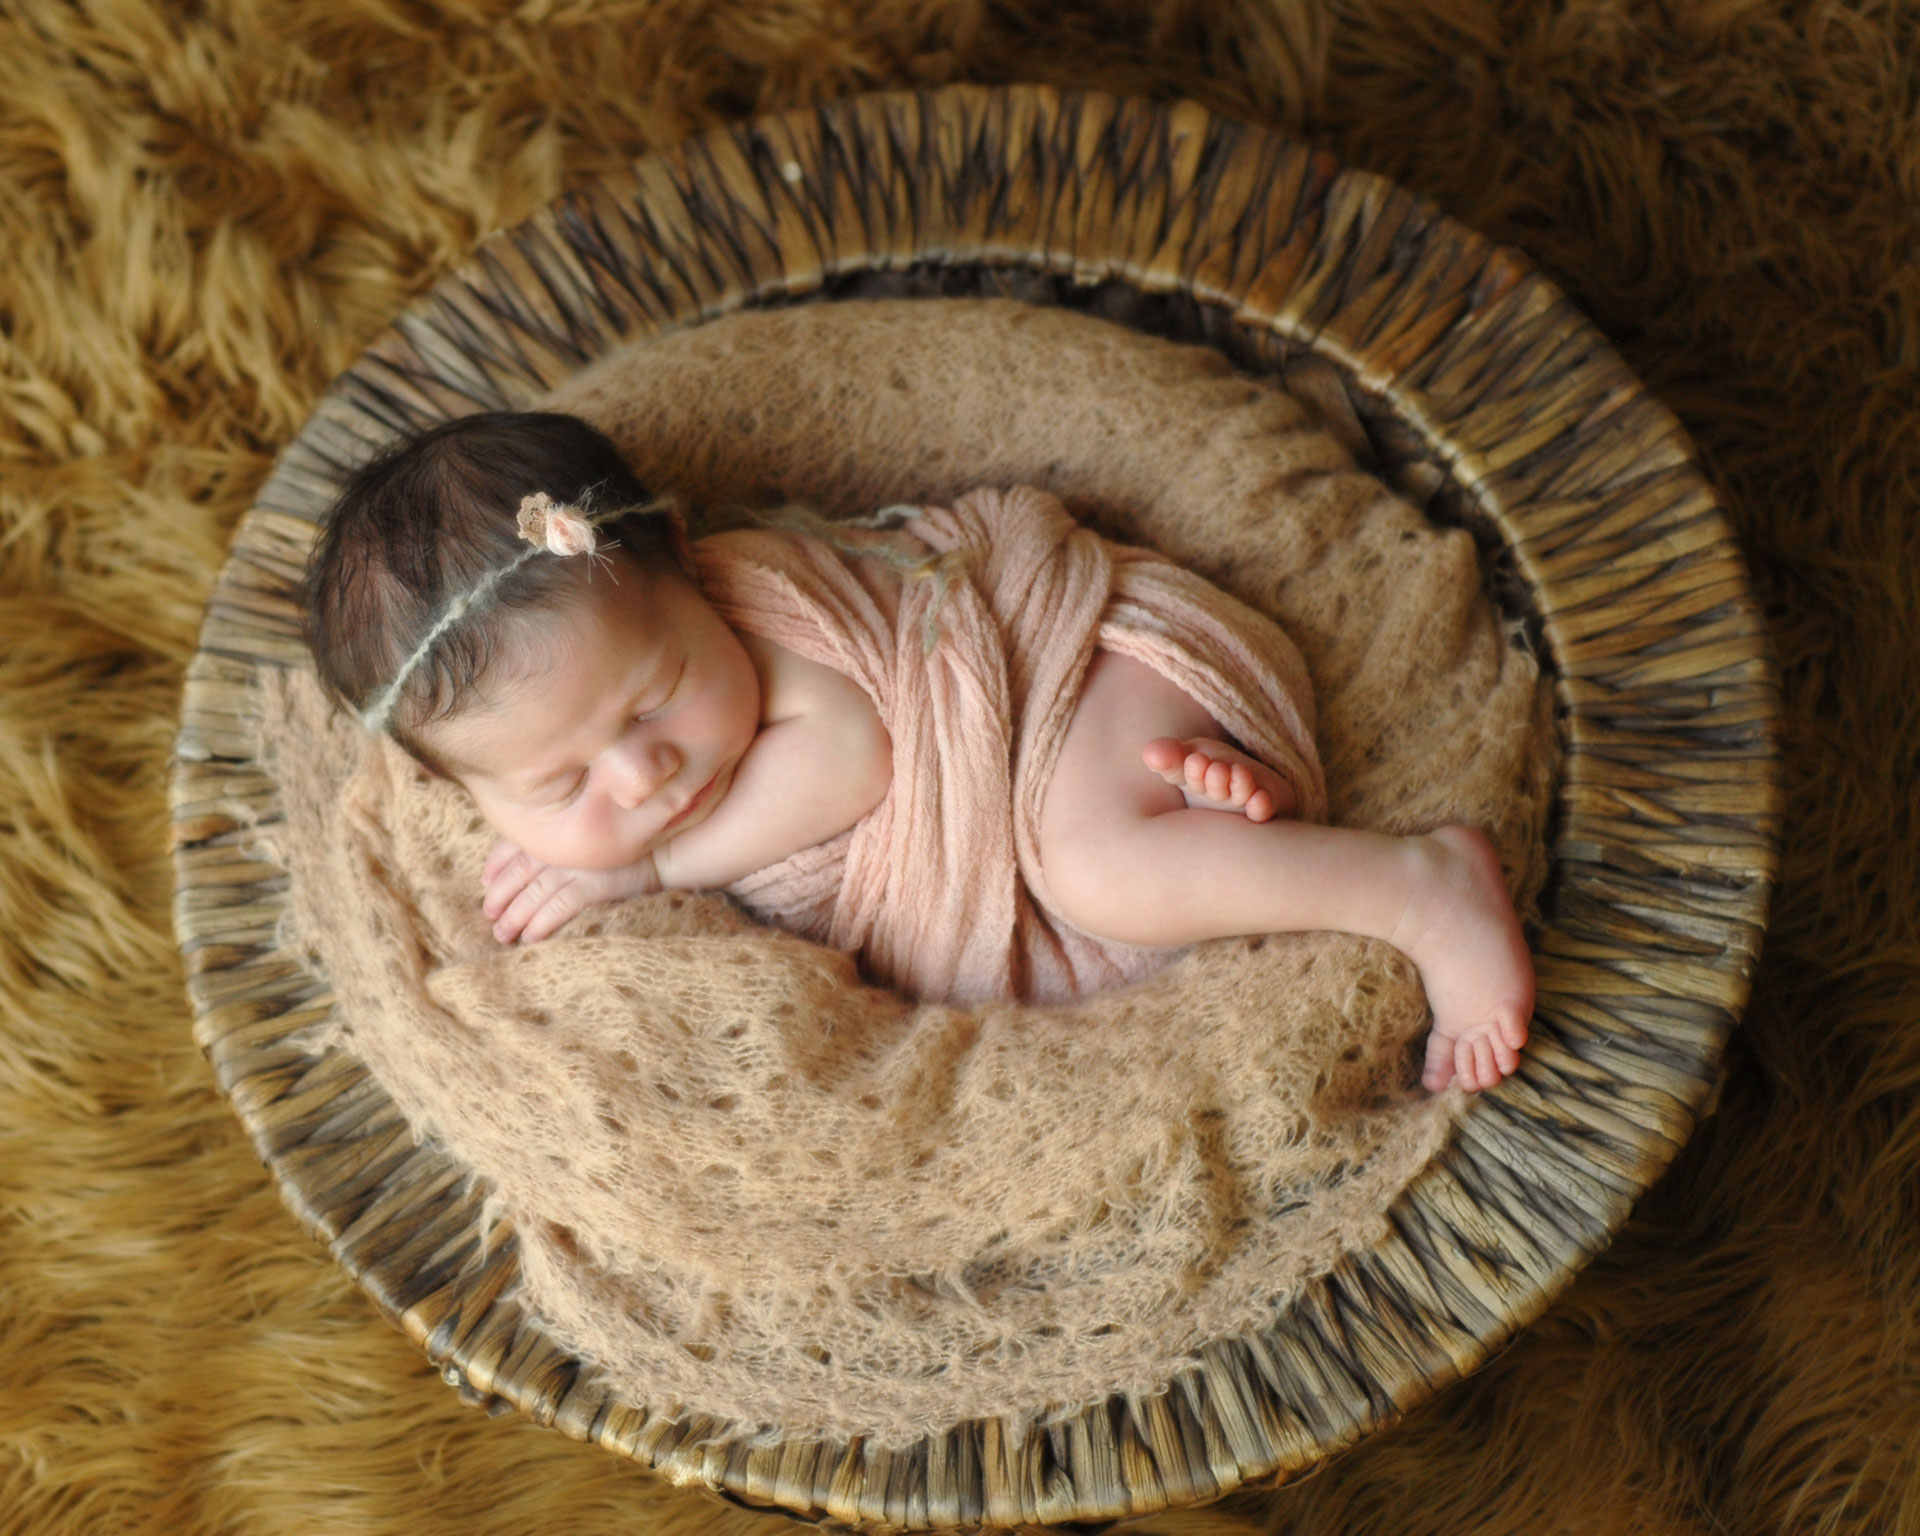 newborn photo of a little girl curled up sleeping wrapped pink